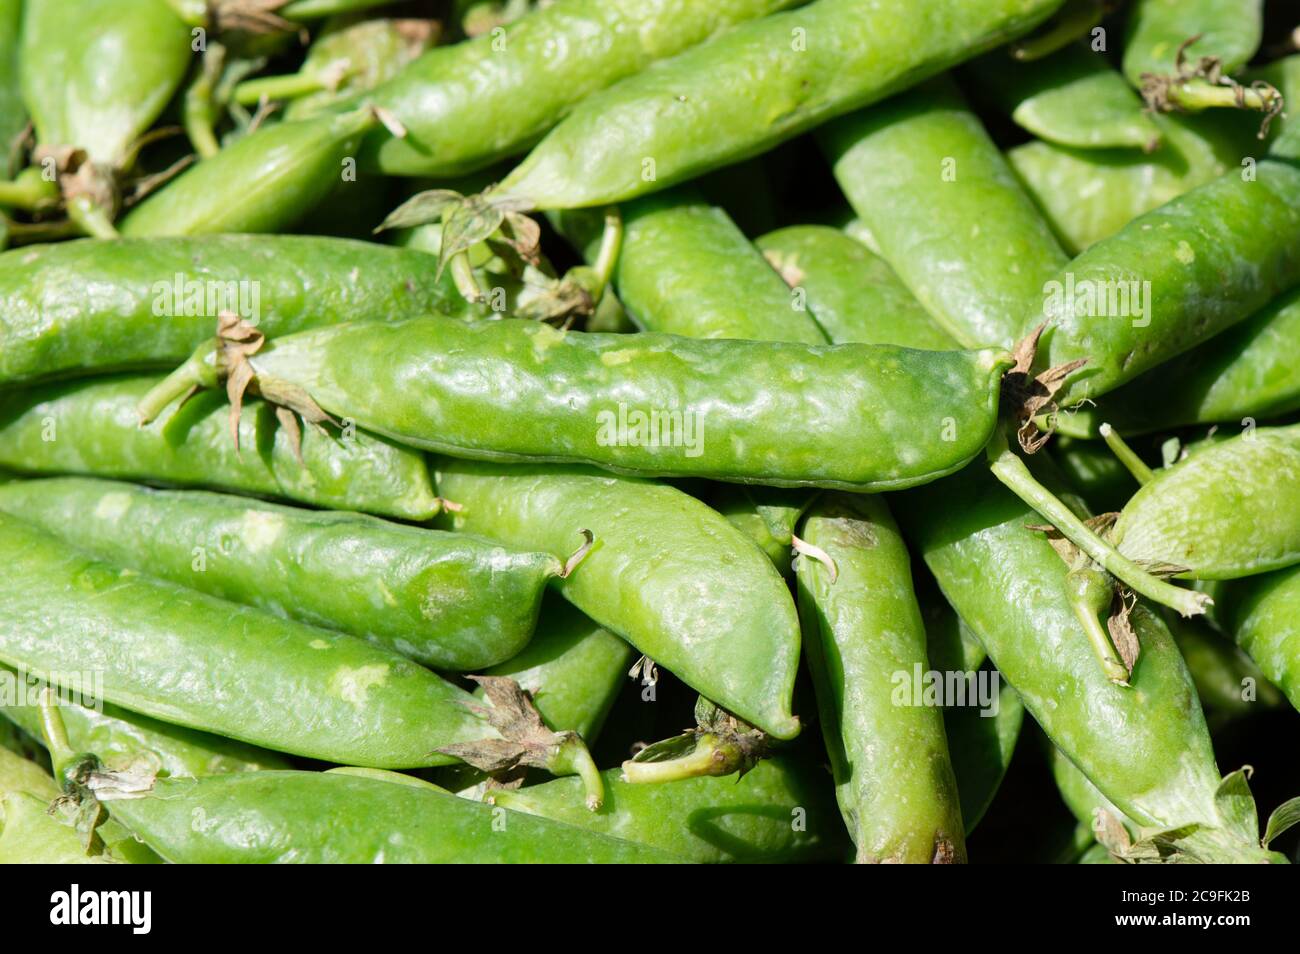 Top view of organic green peas in pods, freshly picked, green background, from Dalmatia, Croatia Stock Photo